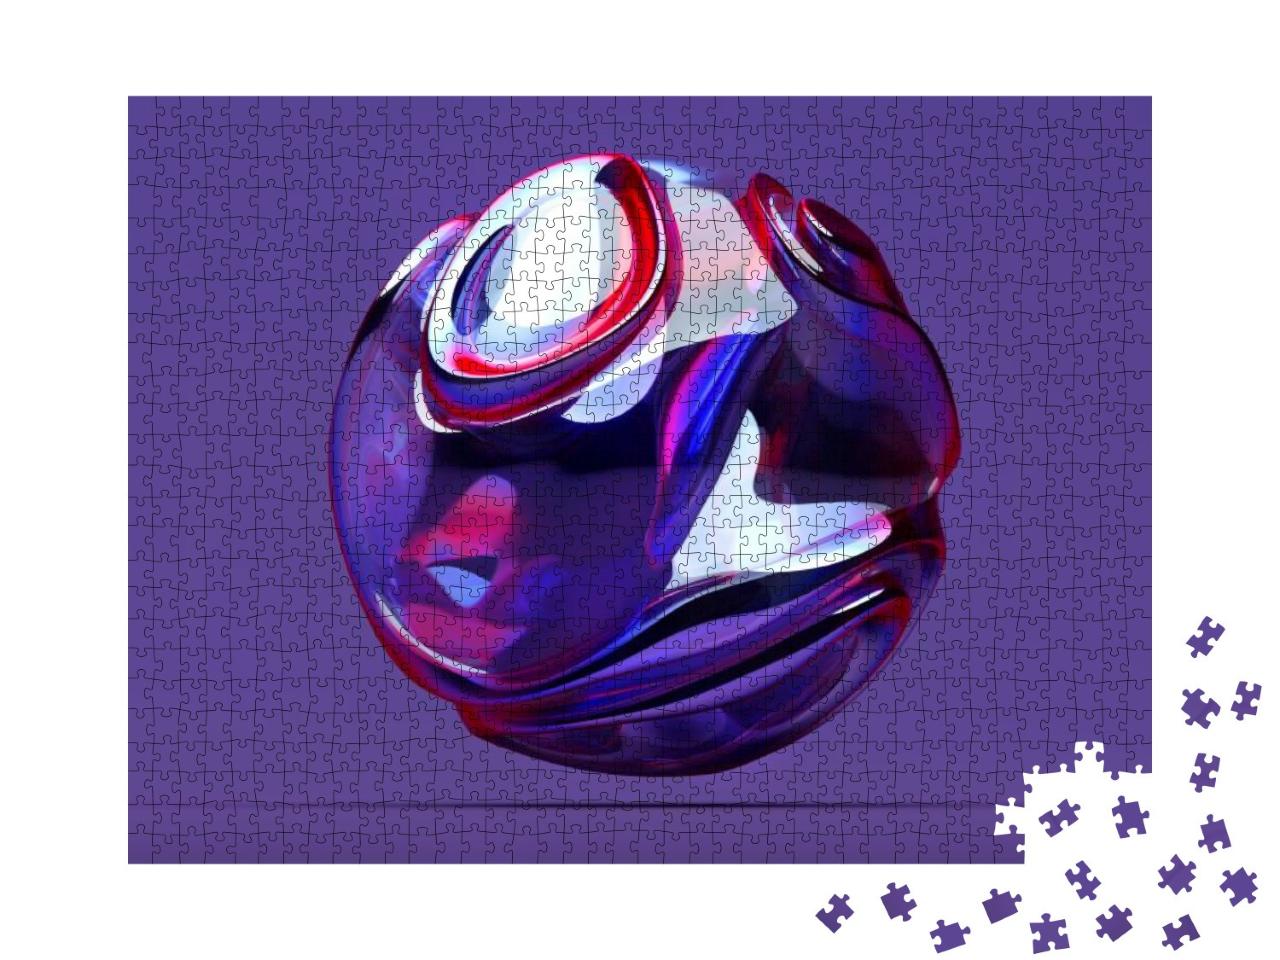 3D Render of Abstract Art 3D Ball in Organic Curve Round... Jigsaw Puzzle with 1000 pieces